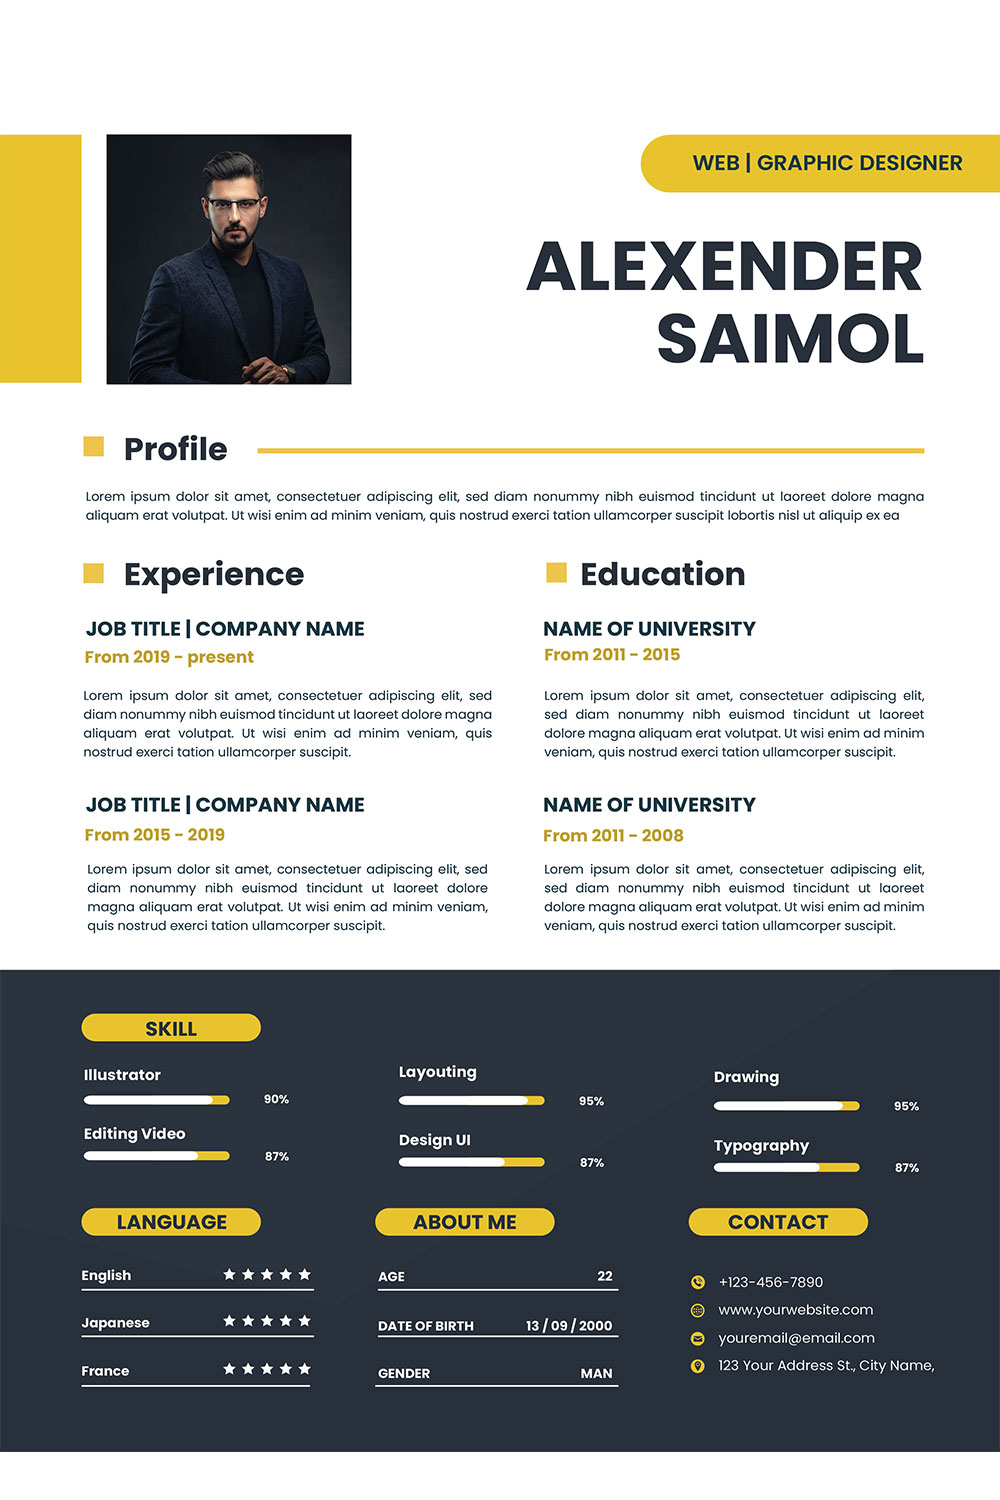 Resume Template is professionally pinterest preview image.